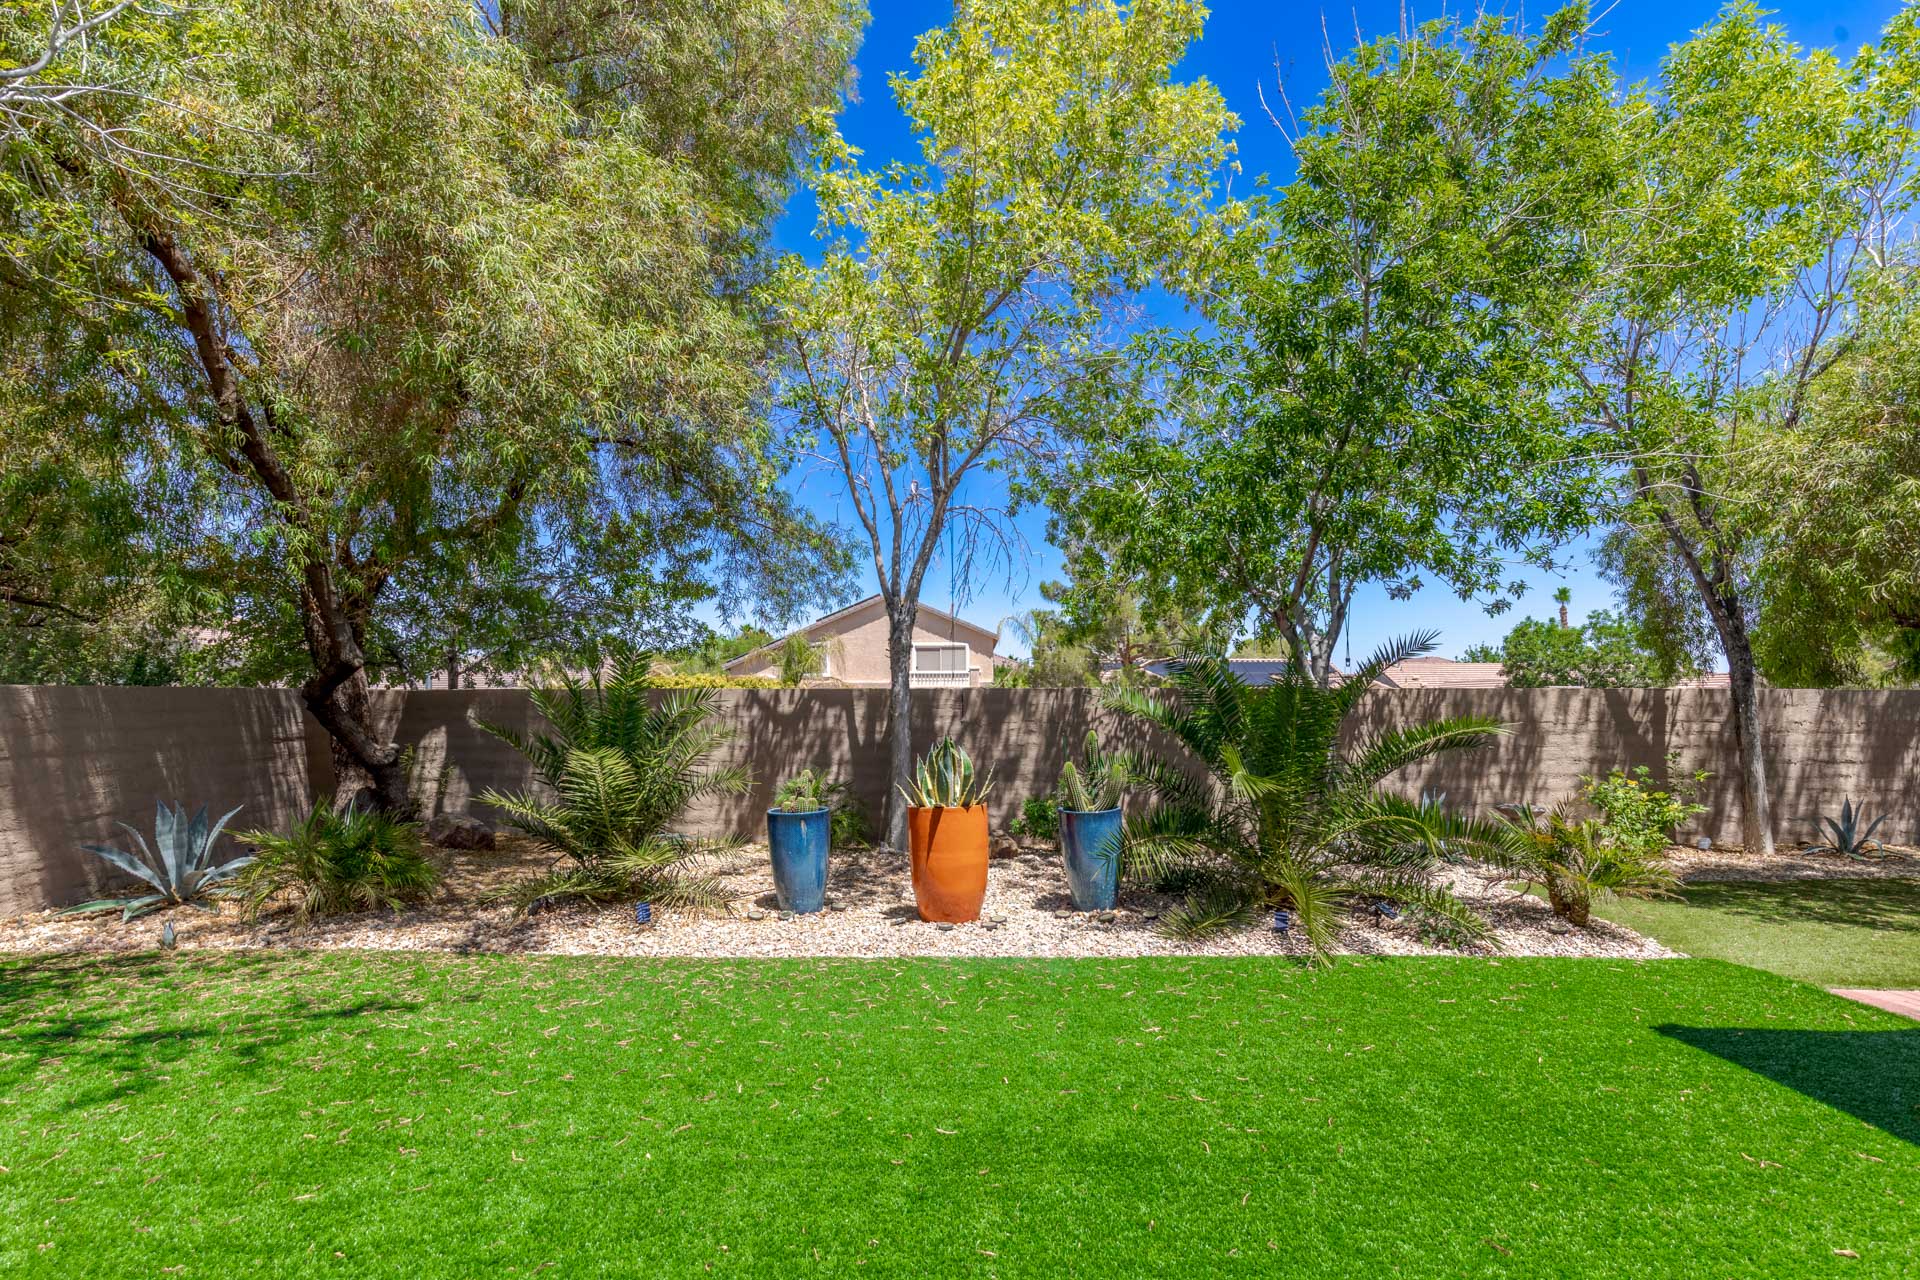 61-fountainhead-circle-hednerson-anthem-country-club-las-vegas-guard-gated-luxury-real-estate-realtor-rob-jensen-company-65